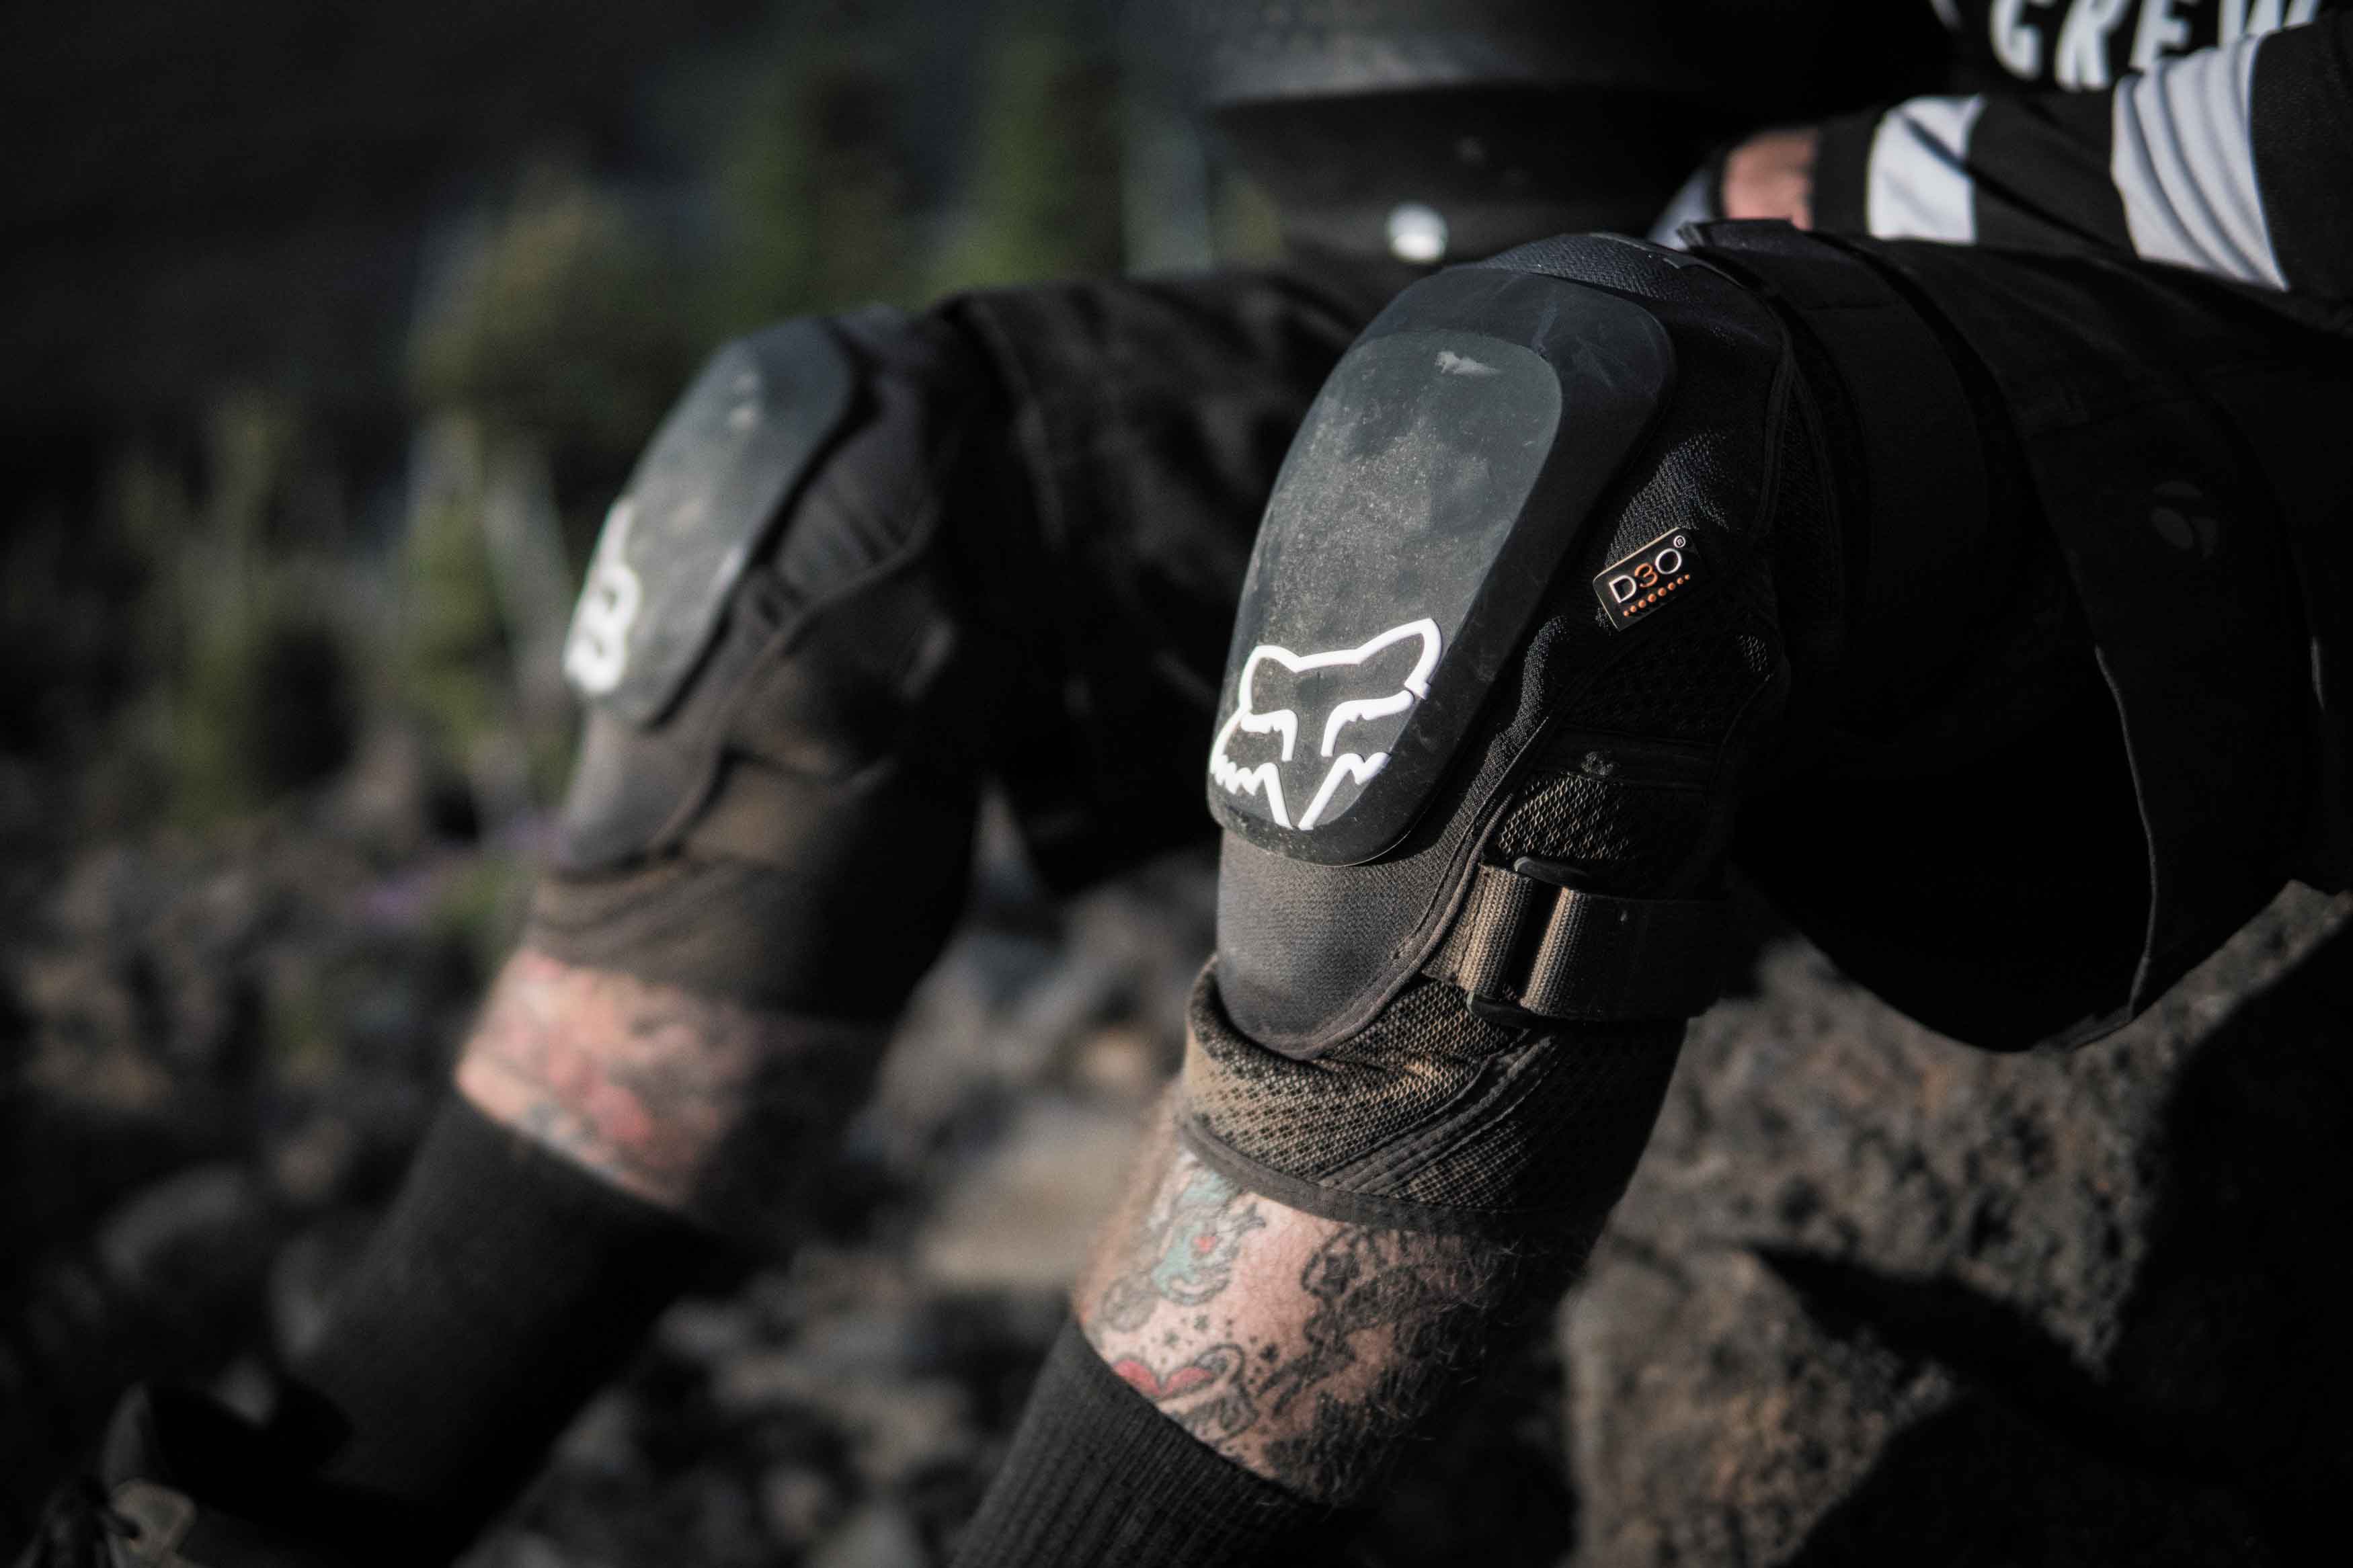 Review: Fox Launch Pro D30 Knee Pads - The Loam Wolf